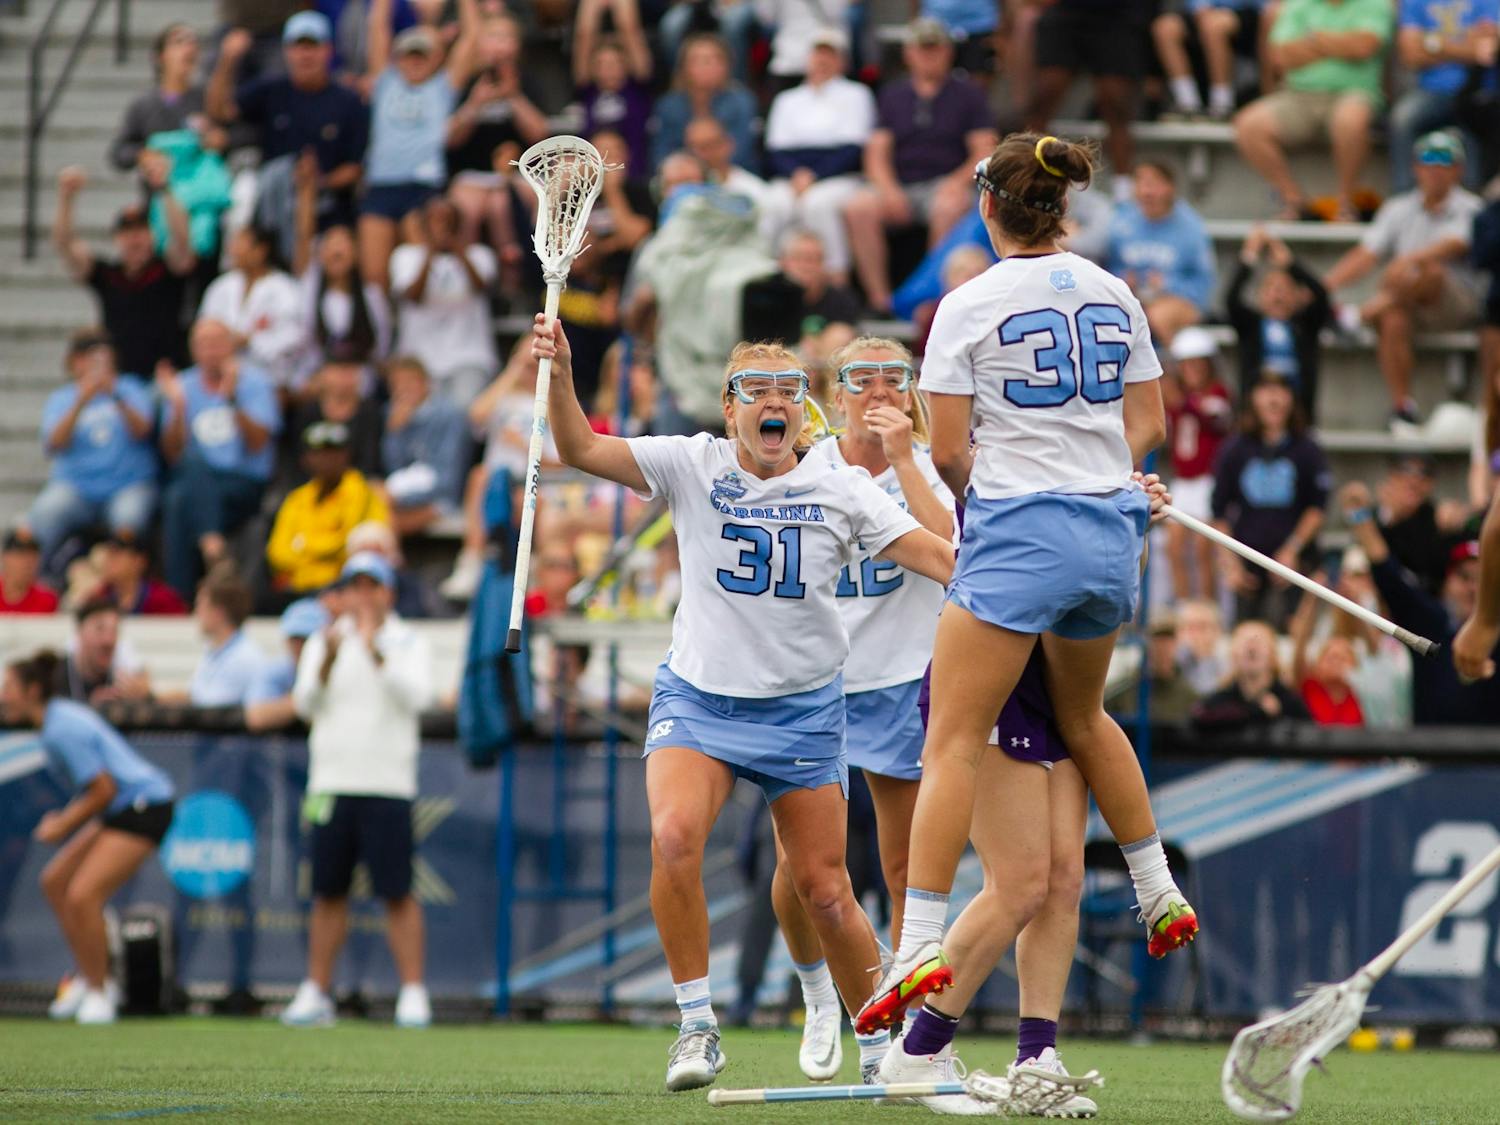 Graduate student attacker Sam Geiersbach (36) celebrates with graduate student attacker Andie Aldave (31) after scoring the tying goal in the fourht quarter of UNC's NCAA Tournament semifinal match against Northwestern at Homewood Field in Baltimore, M.D. on May 27, 2022. UNC won 15-14.